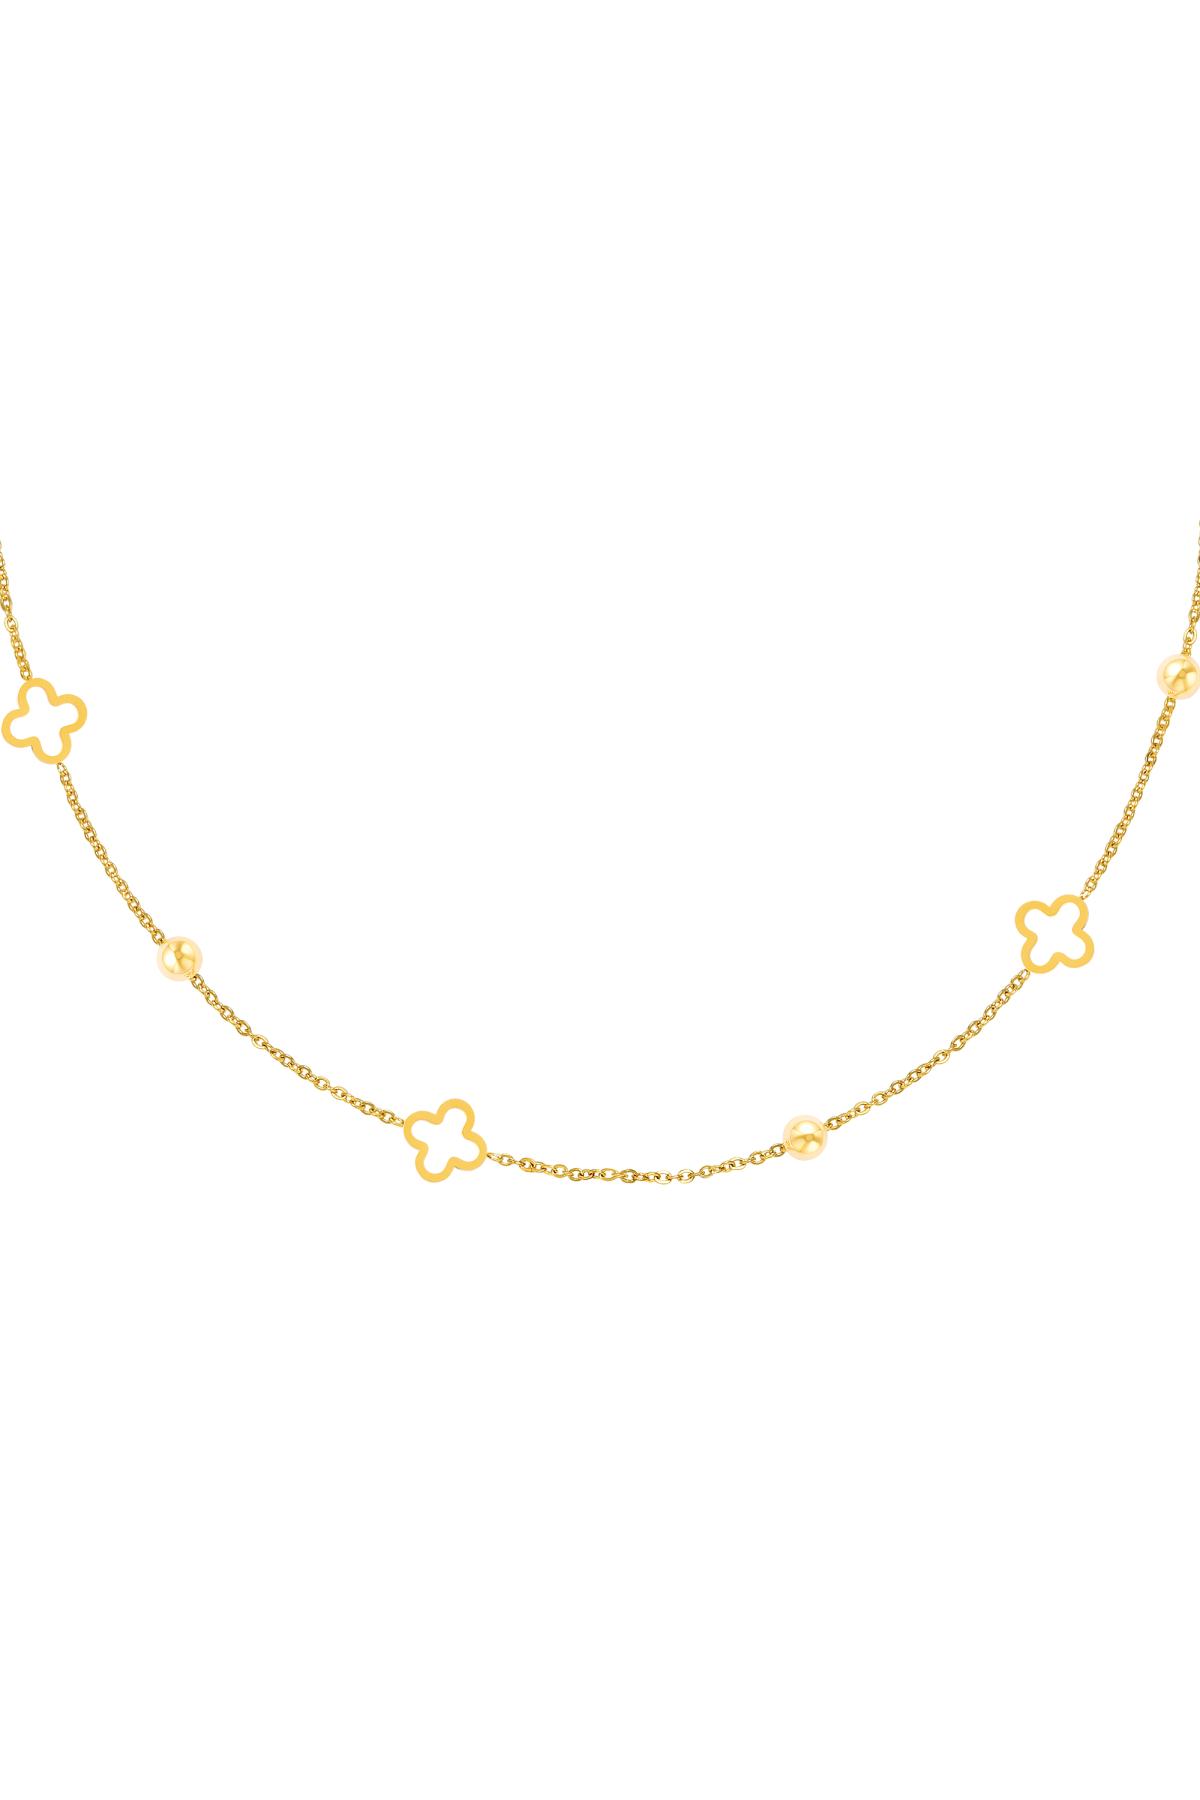 Necklace open clovers Gold Stainless Steel